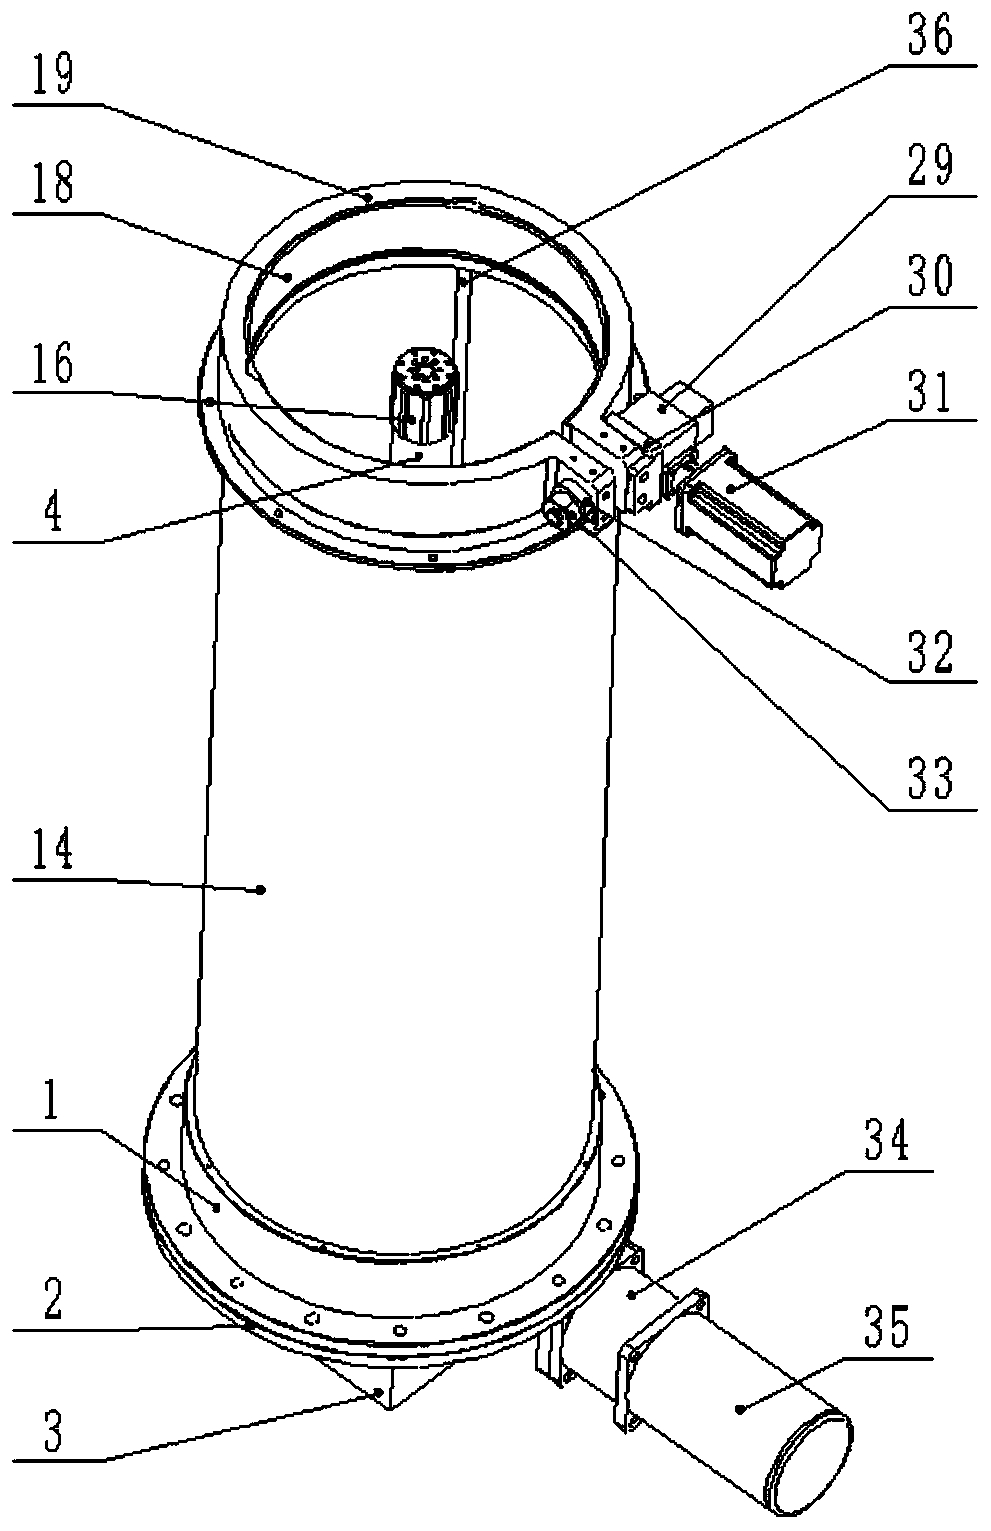 A multi-stage synchronous lifting device based on carbon fiber cylinder